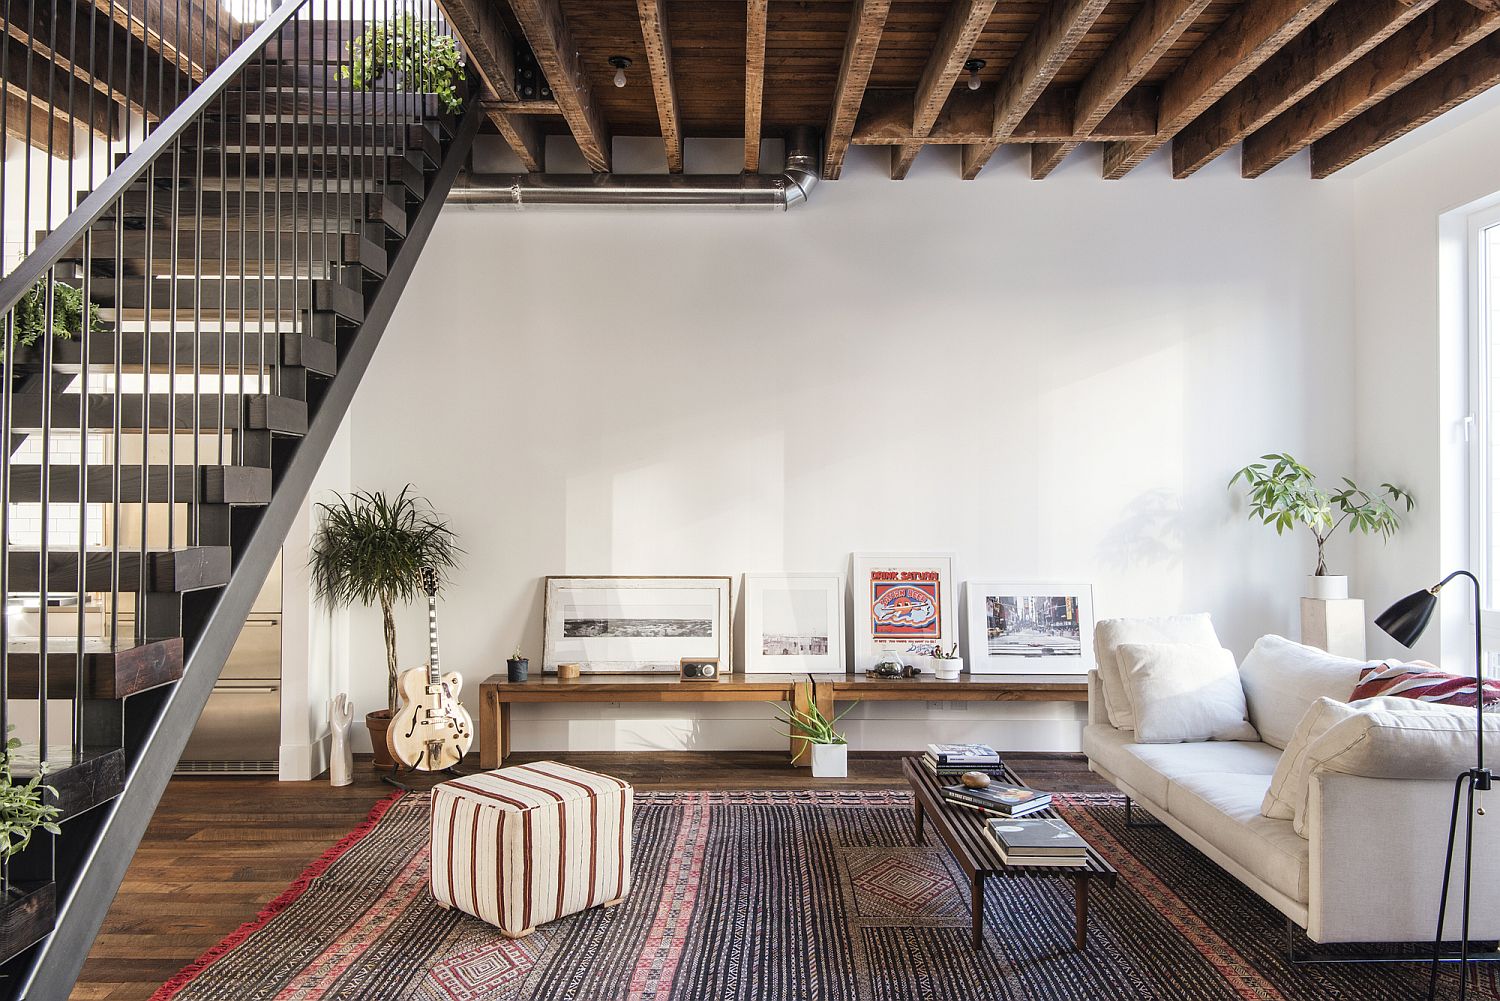 Reclaimed-wood-floors-and-custom-wood-and-steel-staircase-revamp-the-Lorimer-Street-Townhouse